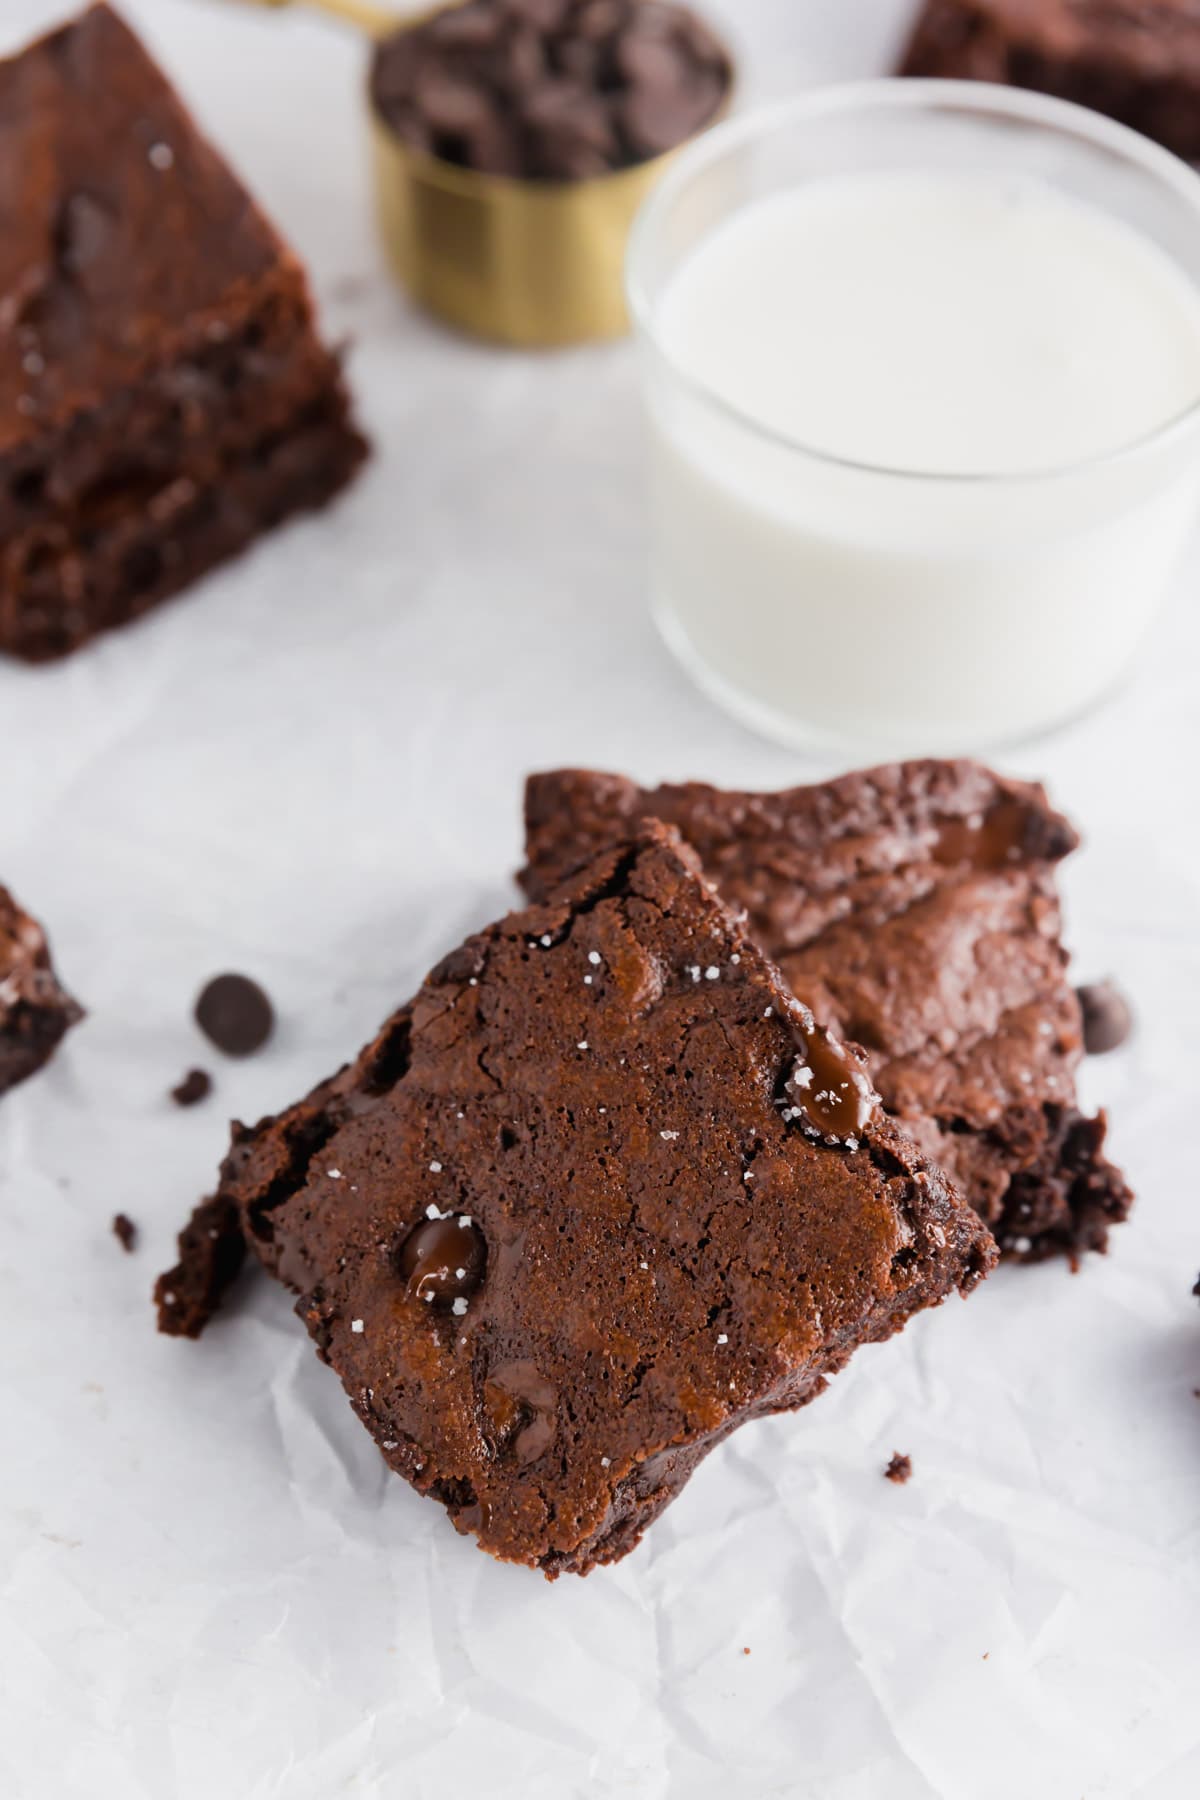 A photo showing two almond flour brownies stacked on top of each other with a glass of milk in the background.